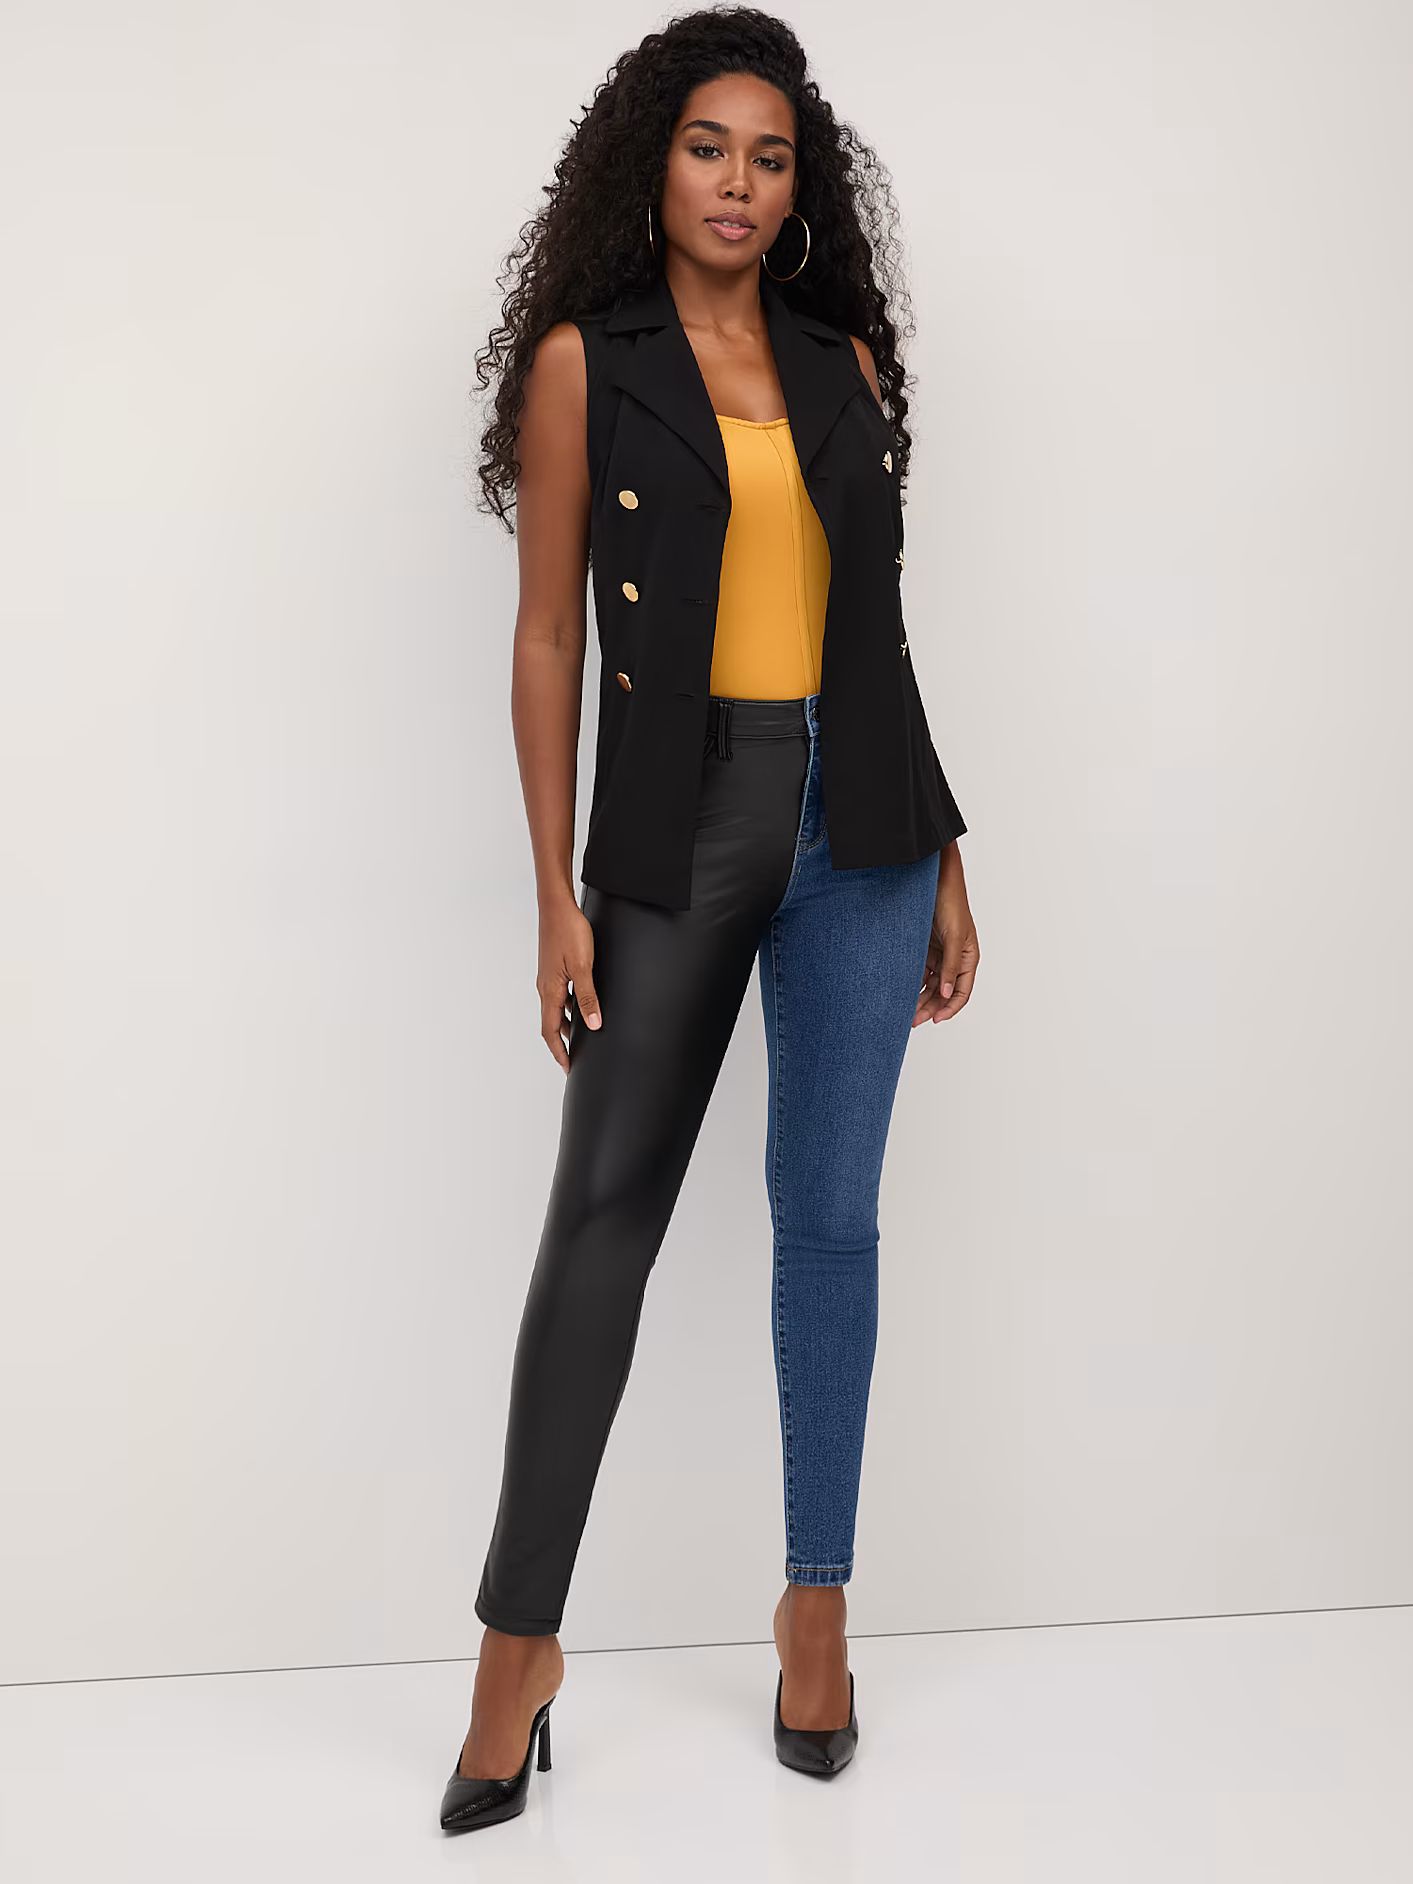 High-Waisted Faux-Leather Colorblock Super-Skinny Jeans - Medium Wash - New York & Company | New York & Company